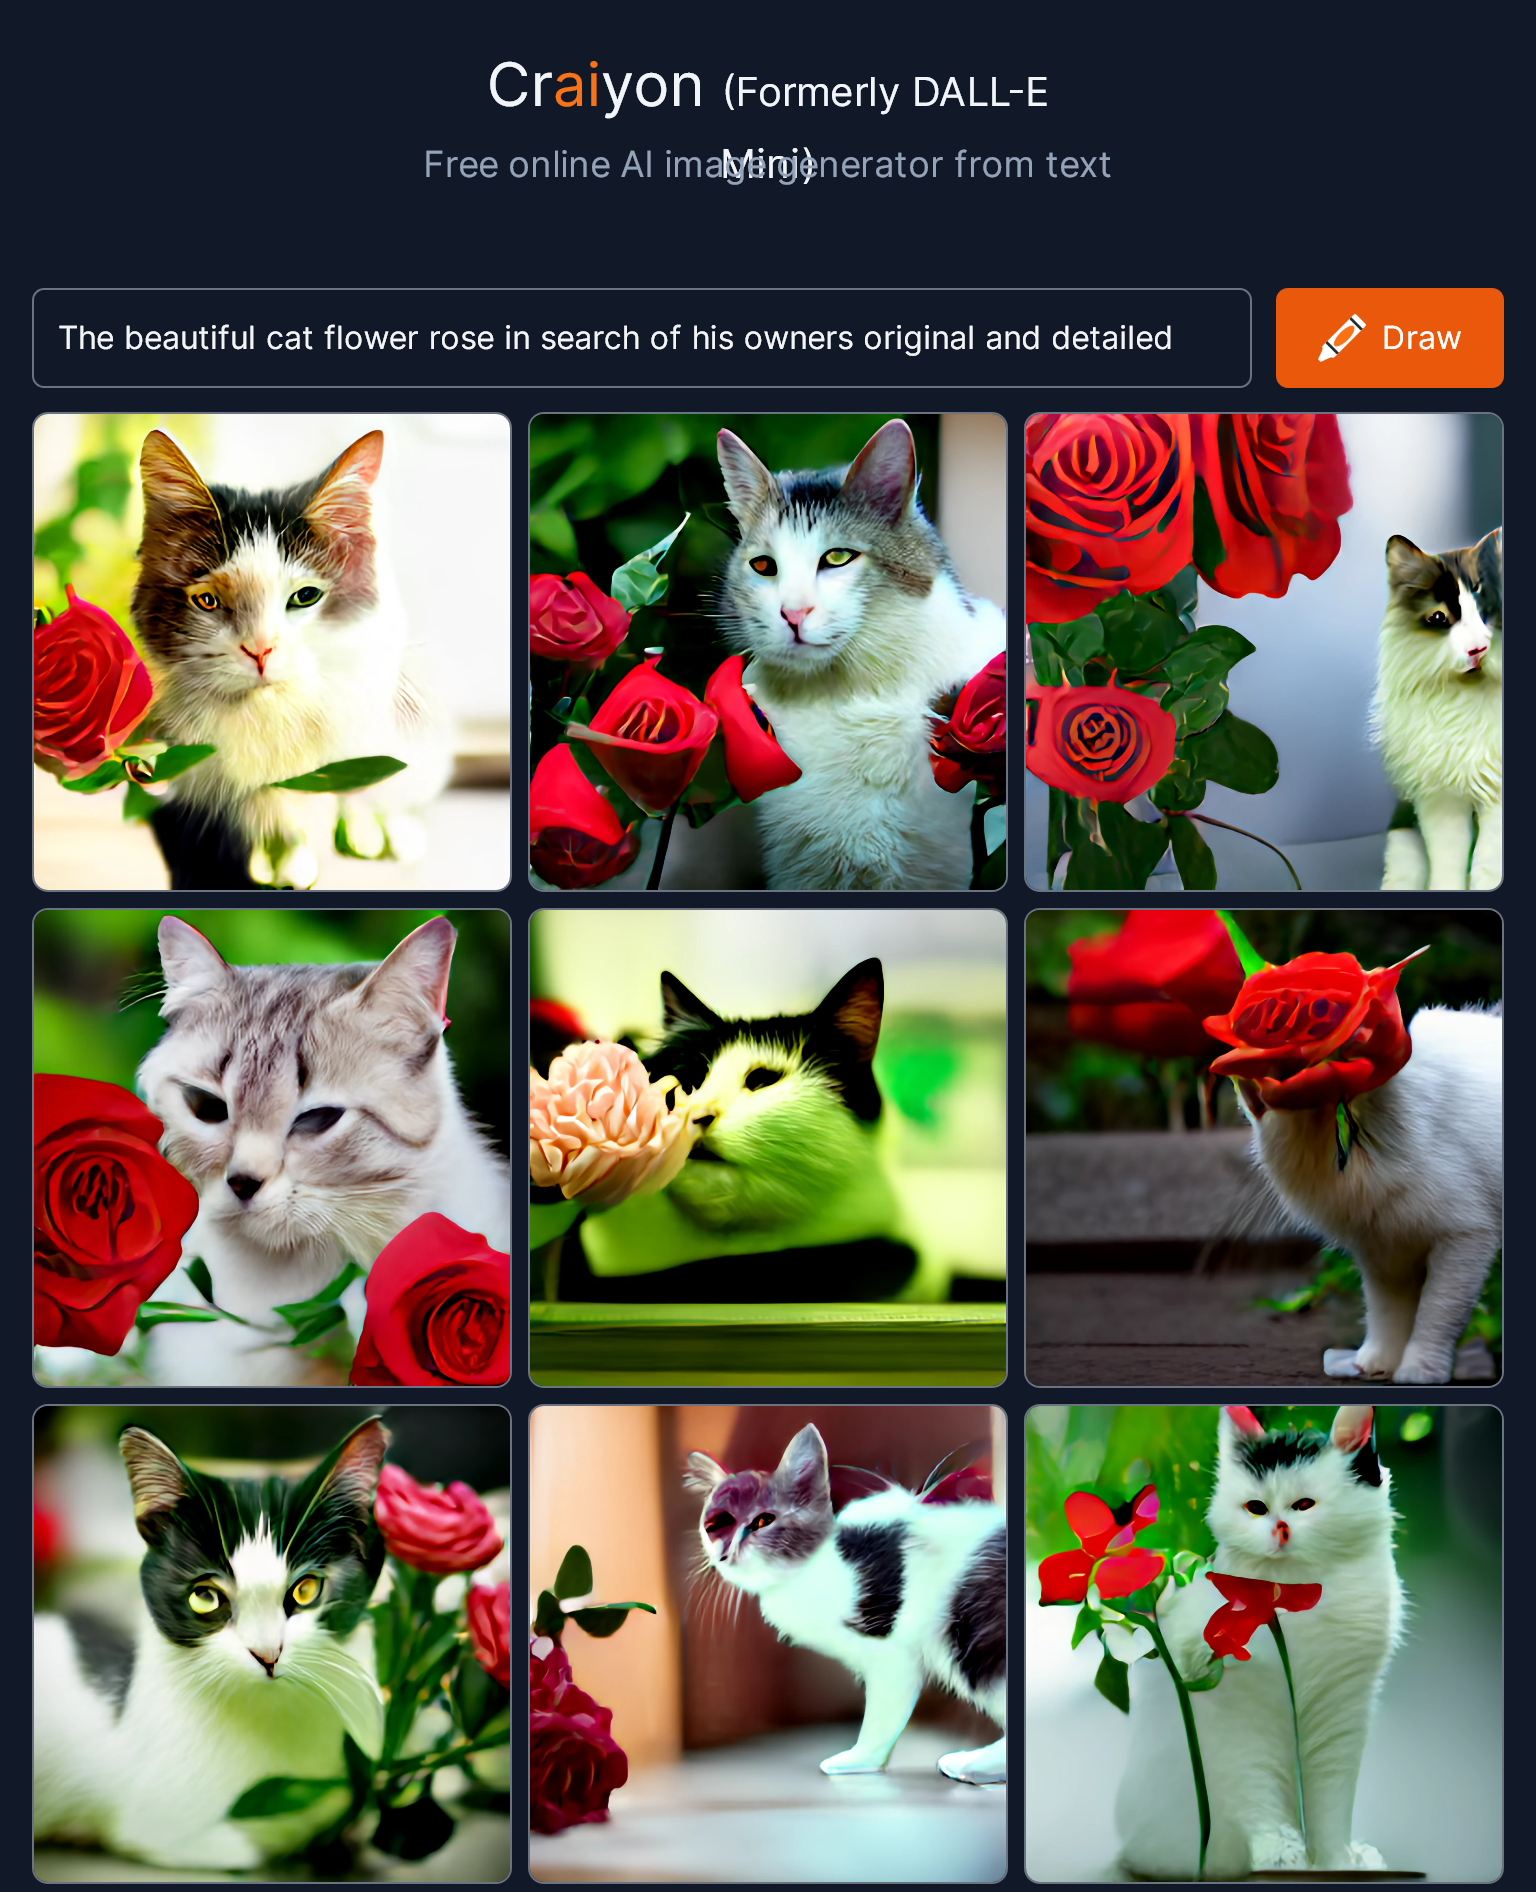 craiyon_181128_The_beautiful_cat_flower_rose_in_search_of_his_owners_original_and_detailed.png